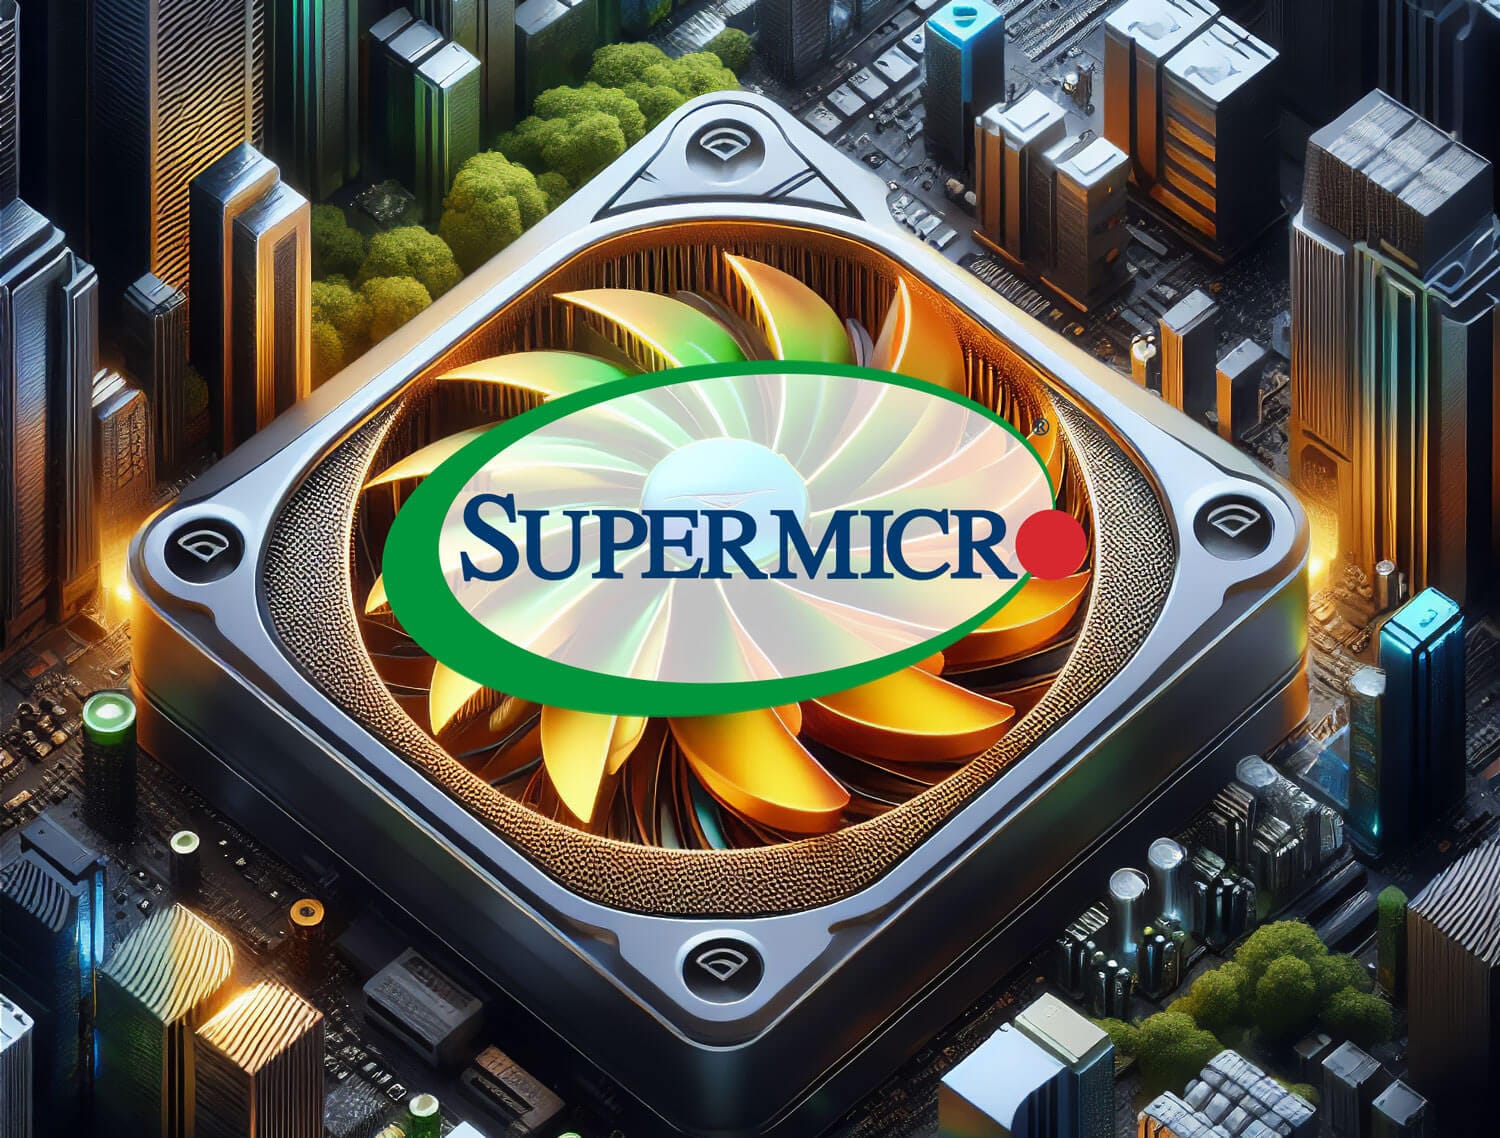 Top Stock Picks: Super Micro Computer, Telephone and Data Systems, Capri Holdings